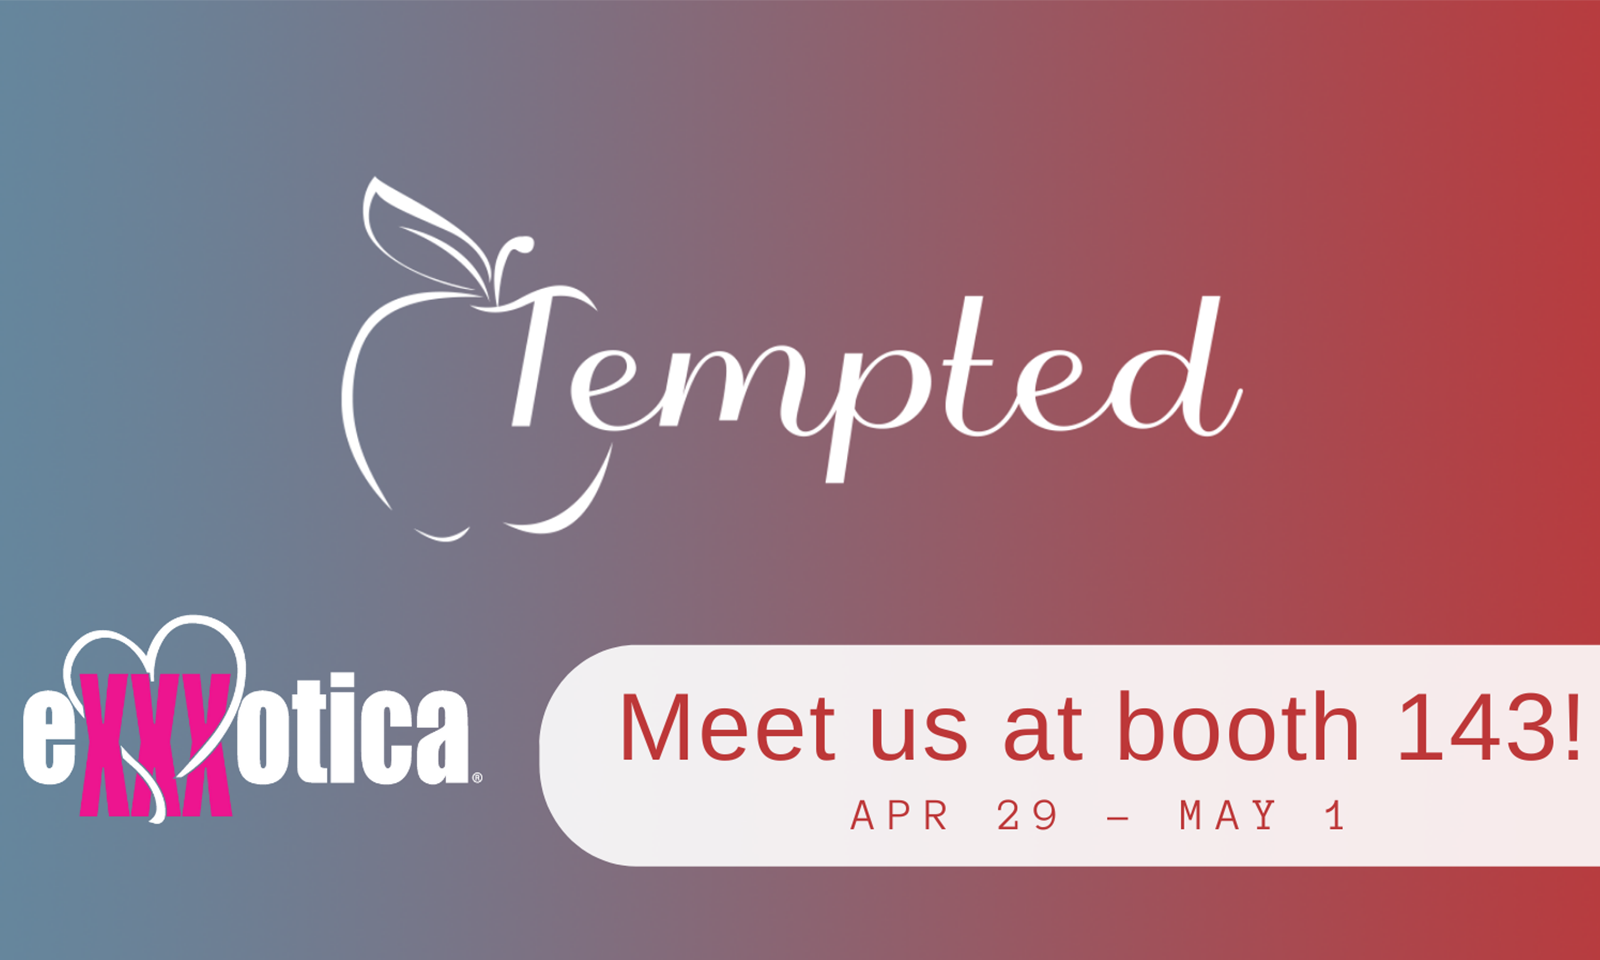 Tempted Set for 1st Exhibiting Stint at Exxxotica Chicago